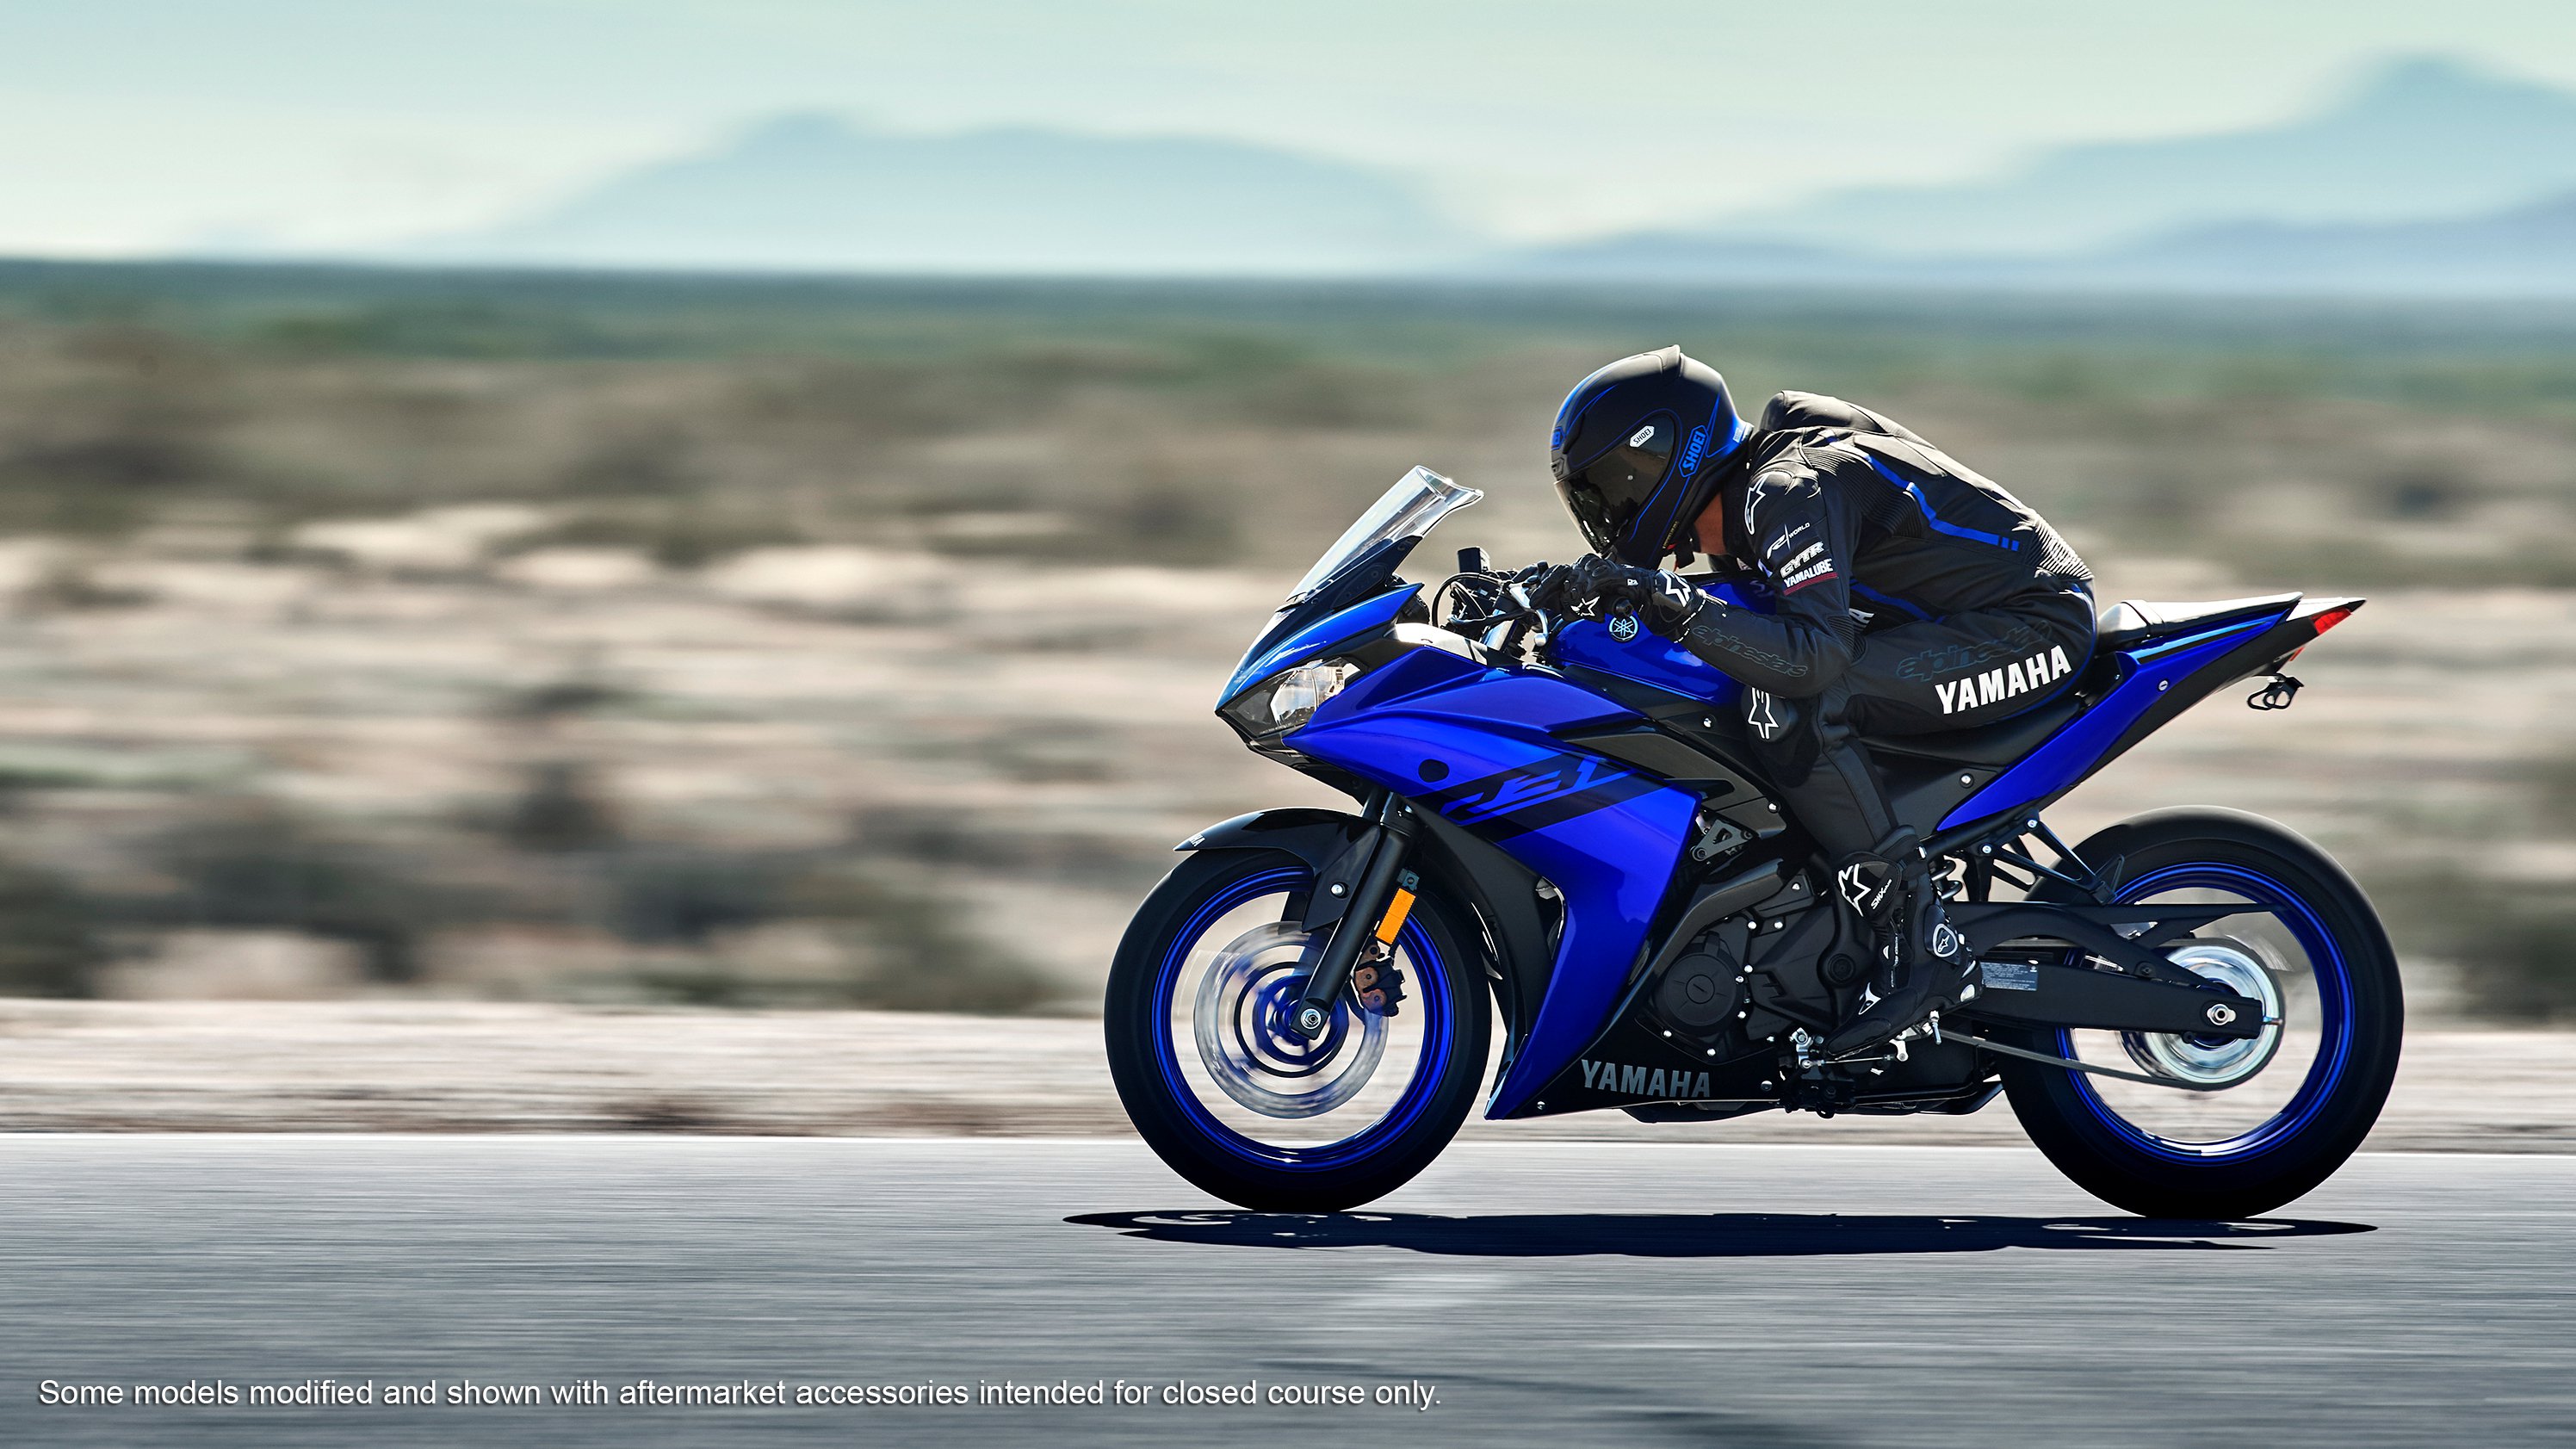 2018 Yamaha Yzf-r3 Pictures, Photos, Wallpapers - Yamaha R3 2018 , HD Wallpaper & Backgrounds